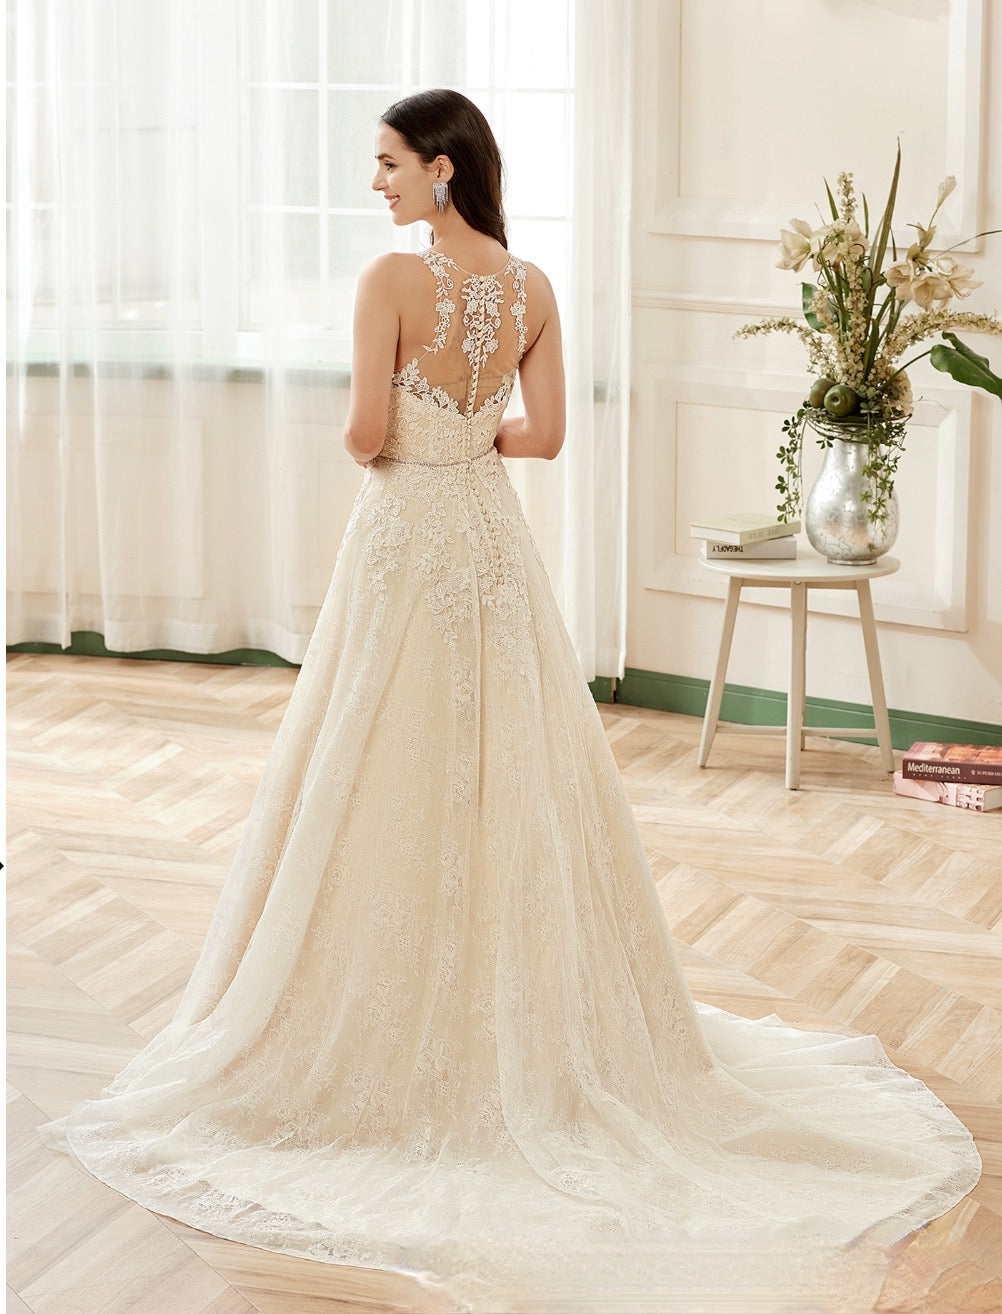 Illusion Halter Neckline Lace Tulle Bridal Gown